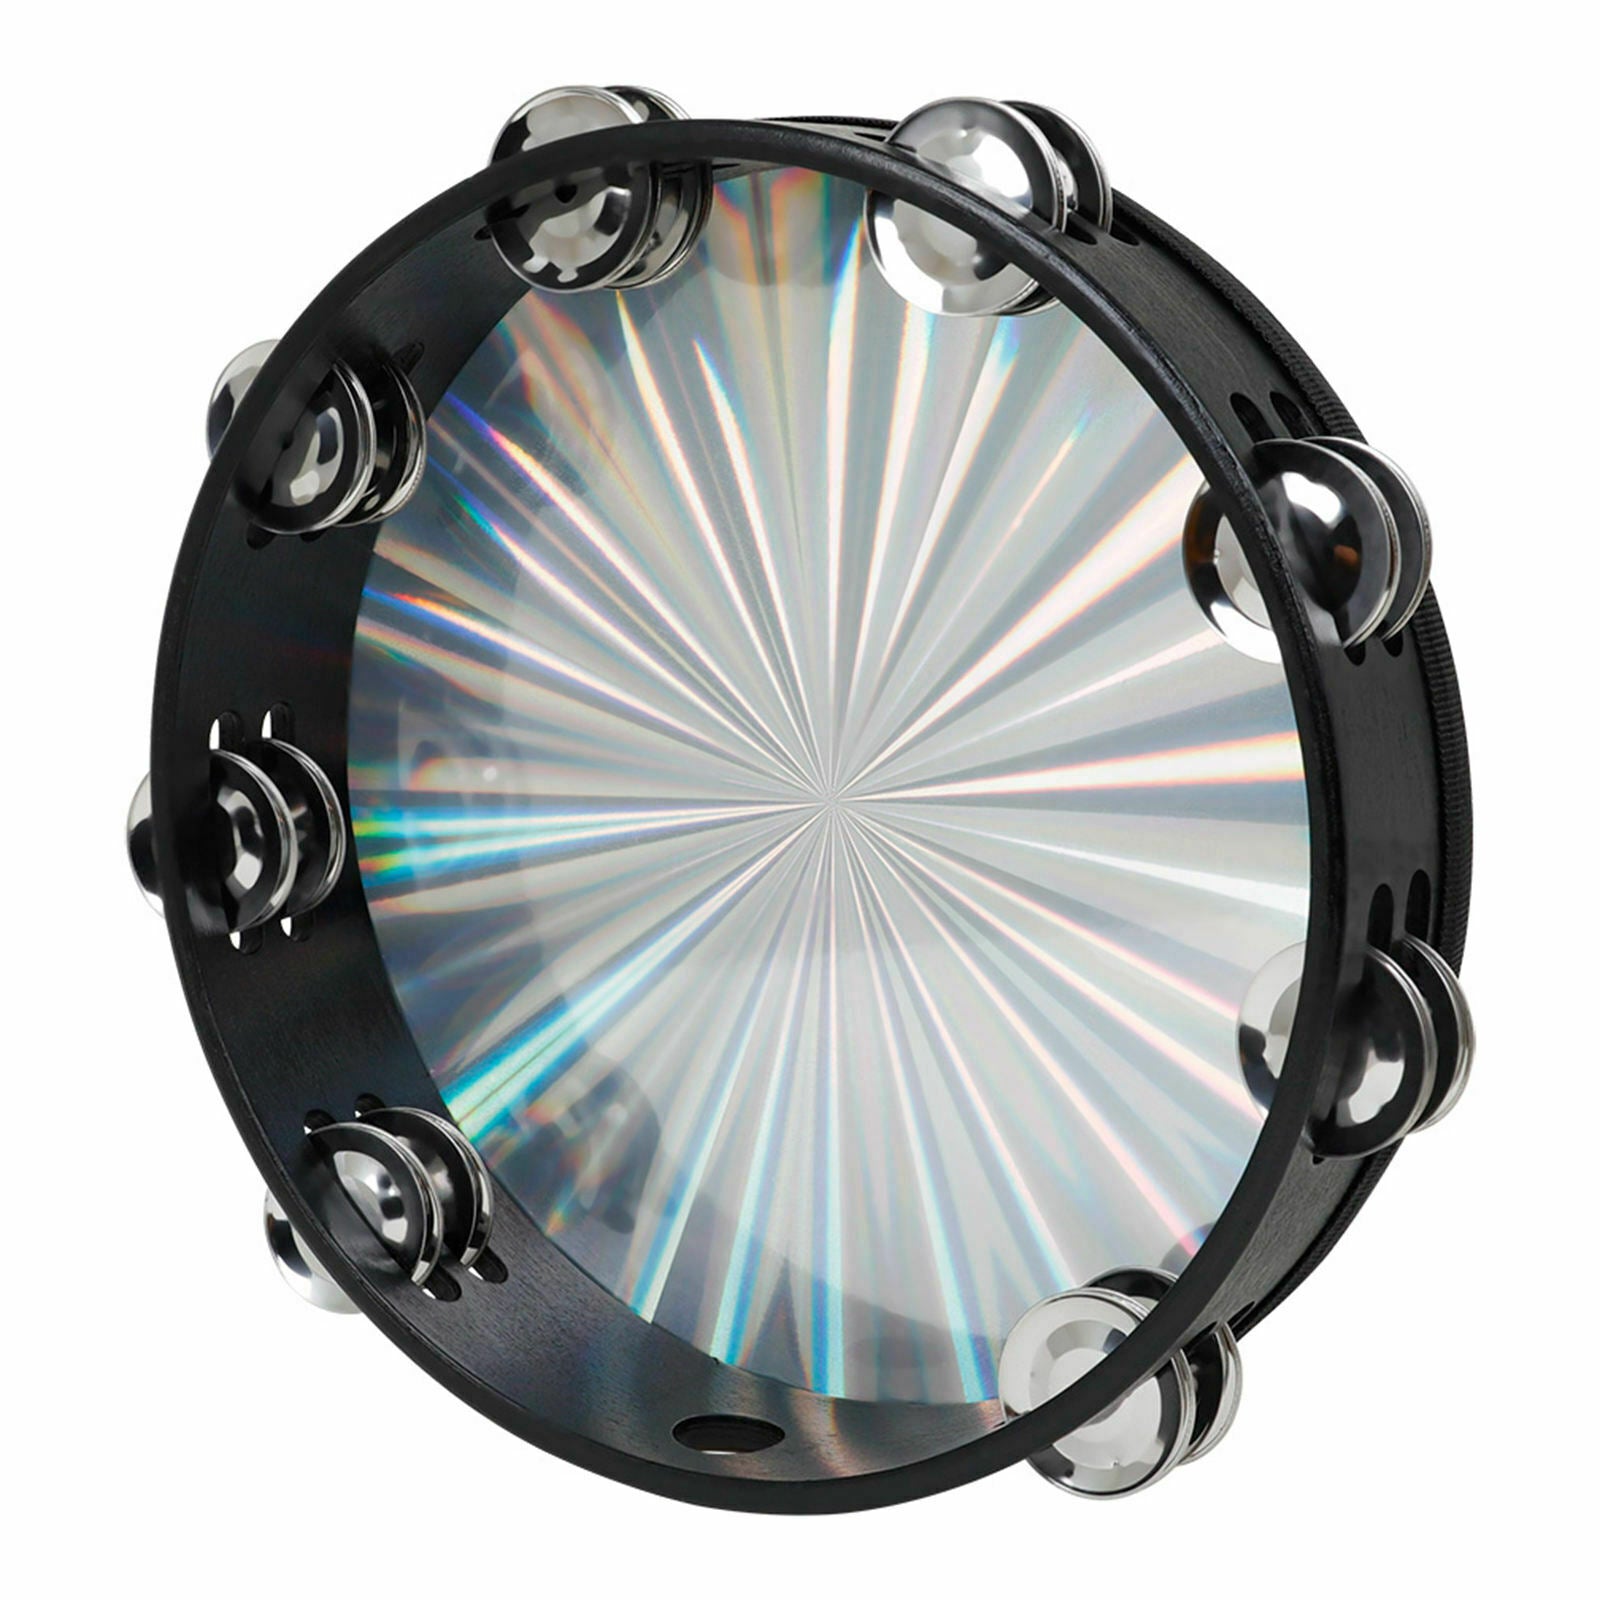 10 Inch Radiant Tambourine Performance Level Percussion Festival for KTV